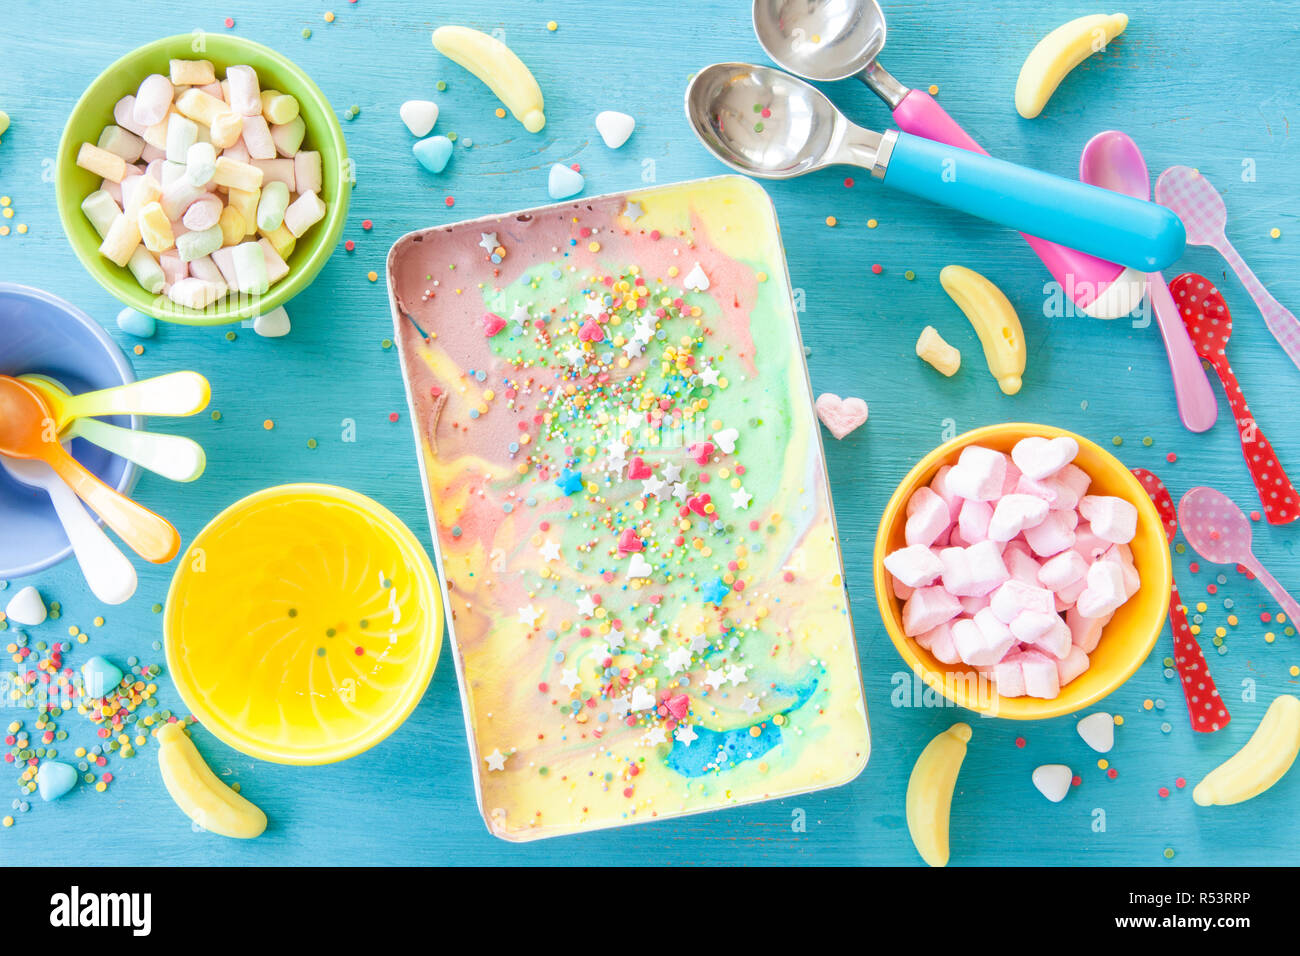 colorful ice cream with sprinkles Stock Photo